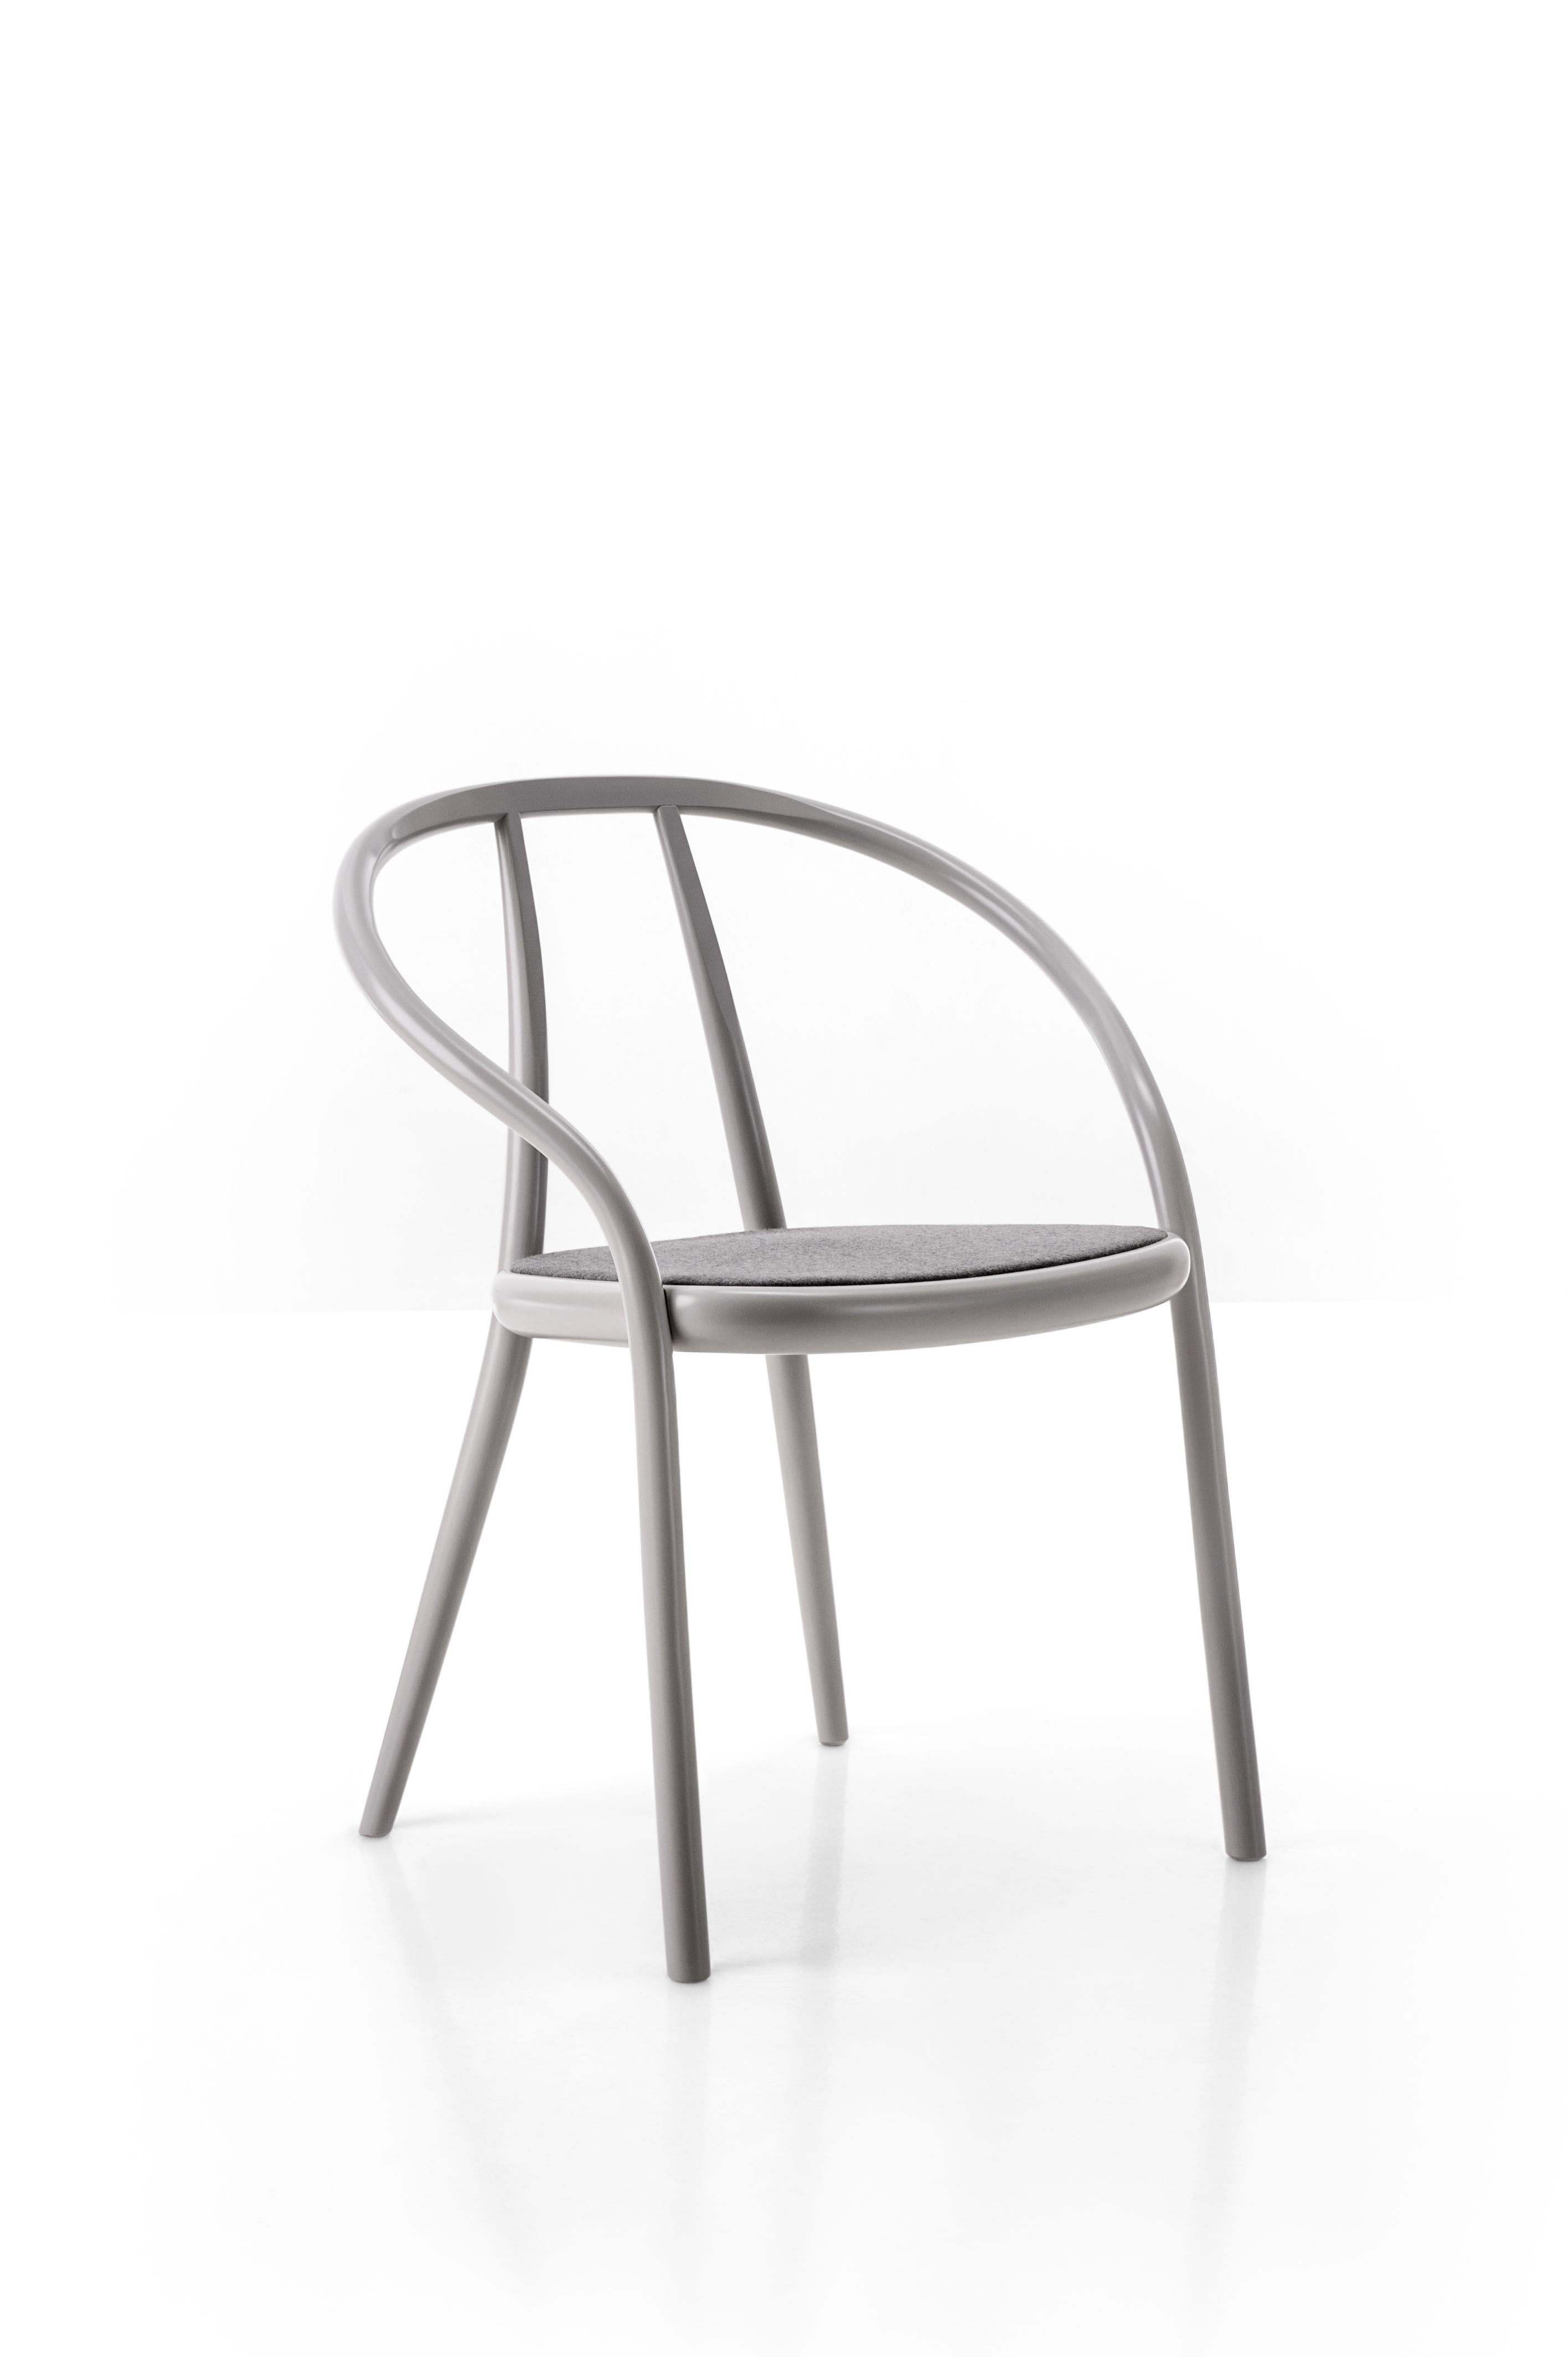 Gustav by Gordon Guillaumier has a solid beech structure with its backrest and arm rests joined to the front legs by a single curved element with a round section. The back legs are connected to the backrest, pandering to its natural curves and